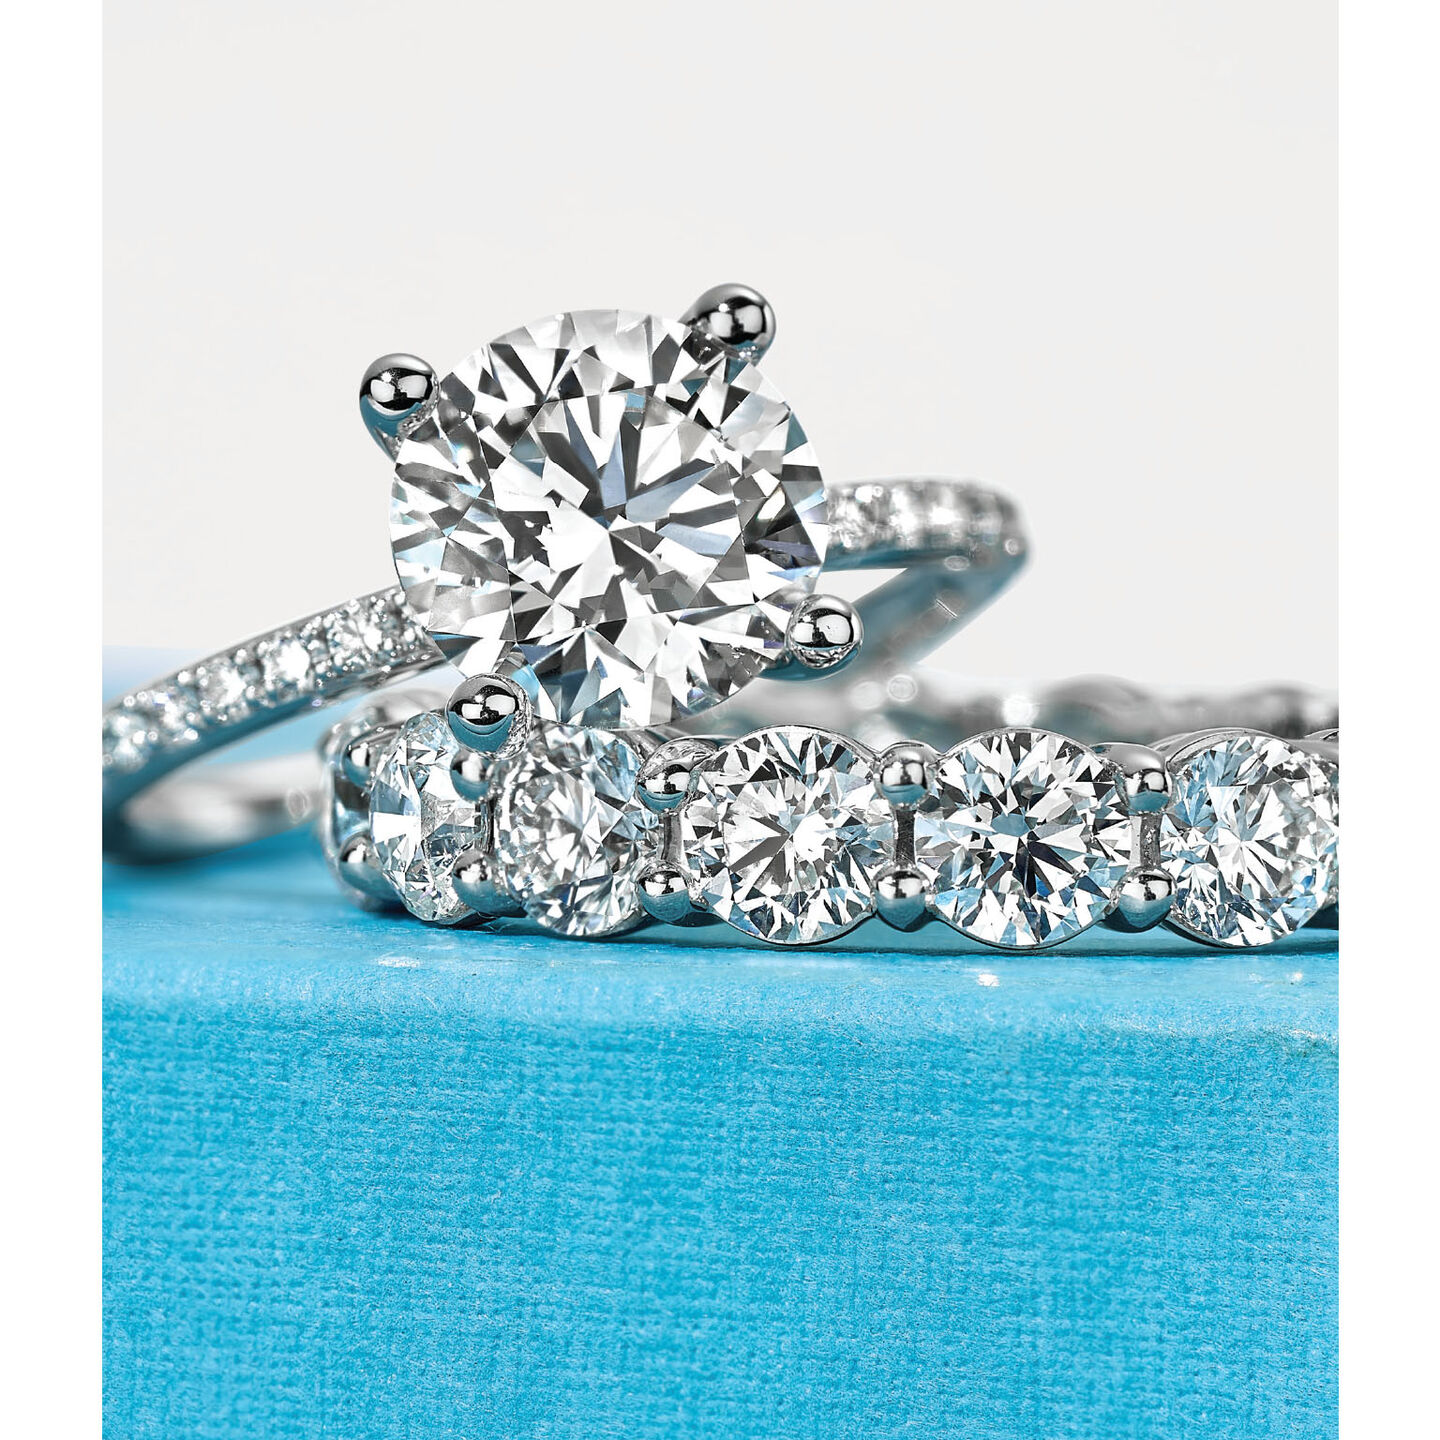 A Birks engagement ring and wedding band sit on a blue box.